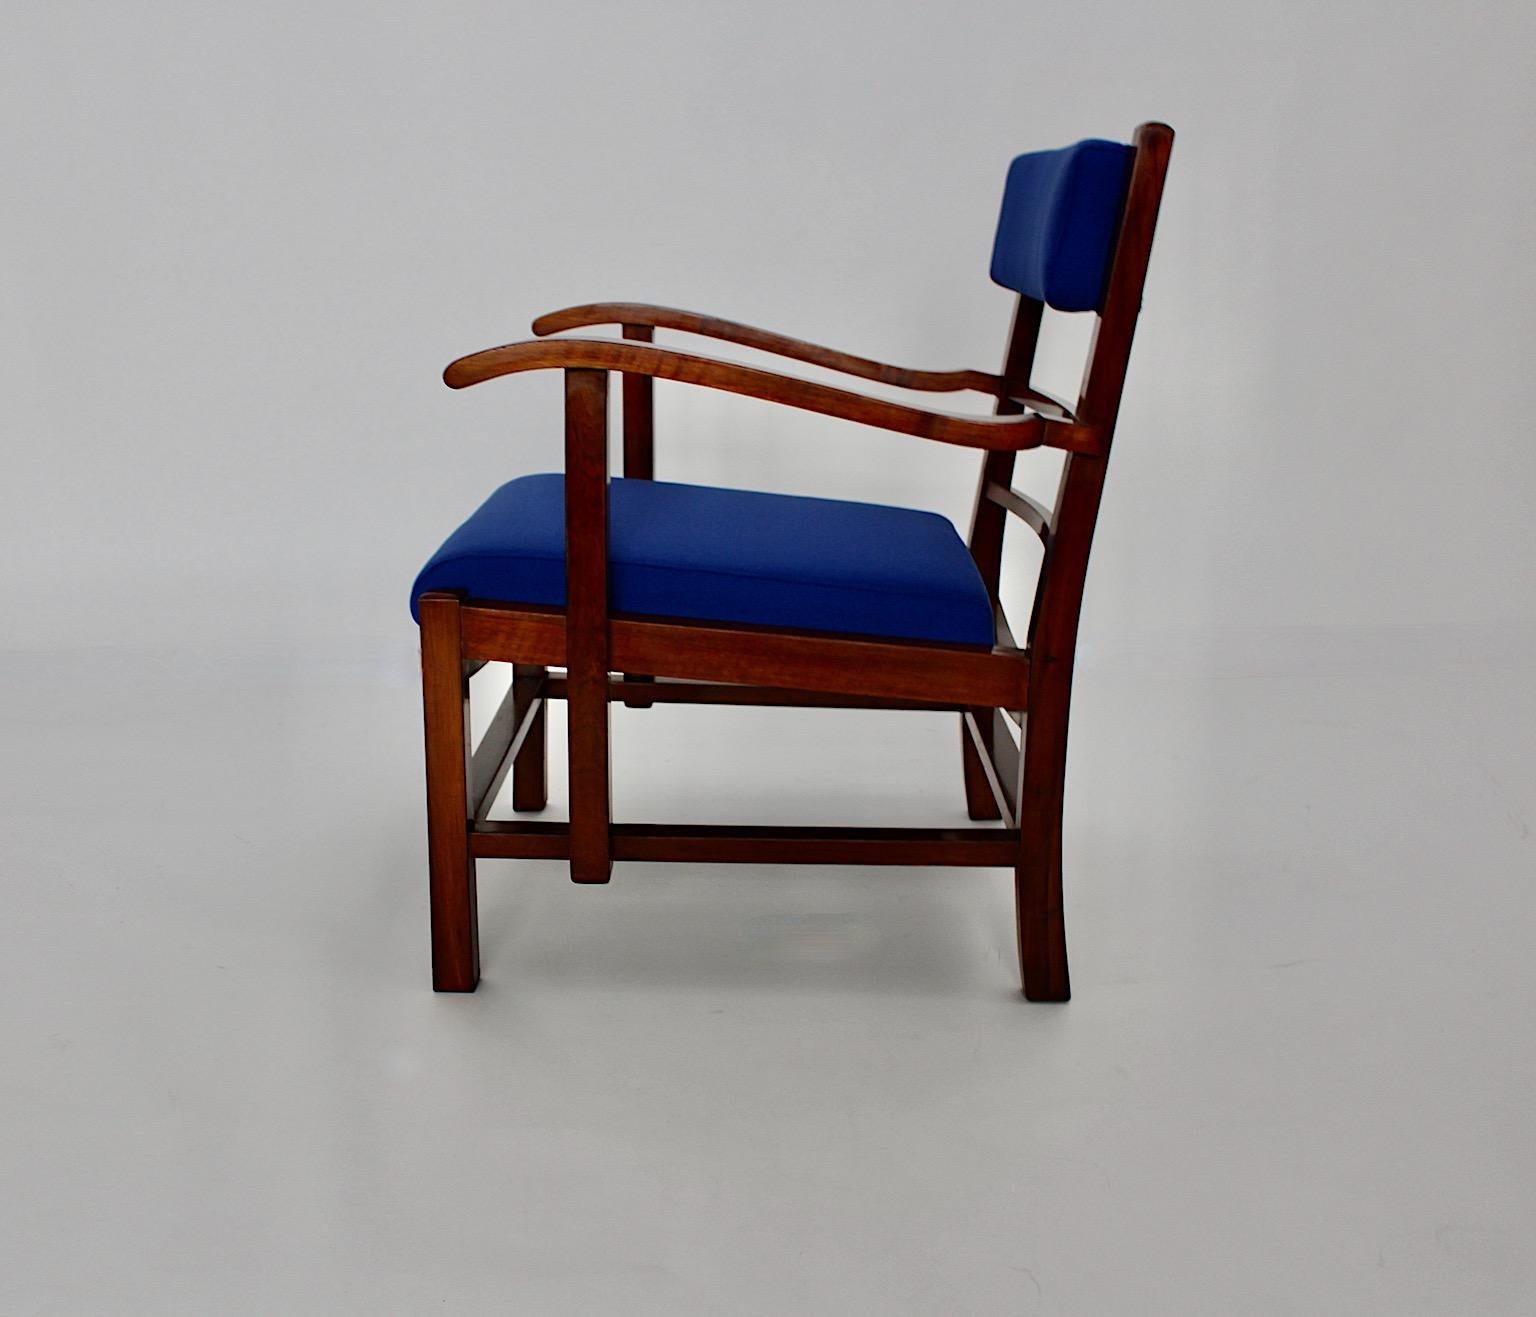 Art Deco vintage armchair or lounge chair from walnut and electric blue textile fabric designed and executed circa 1925 Vienna in the circle of Fritz Gross.
While the walnut frame is shellac polished by hand, the seat and back are reupholstered with